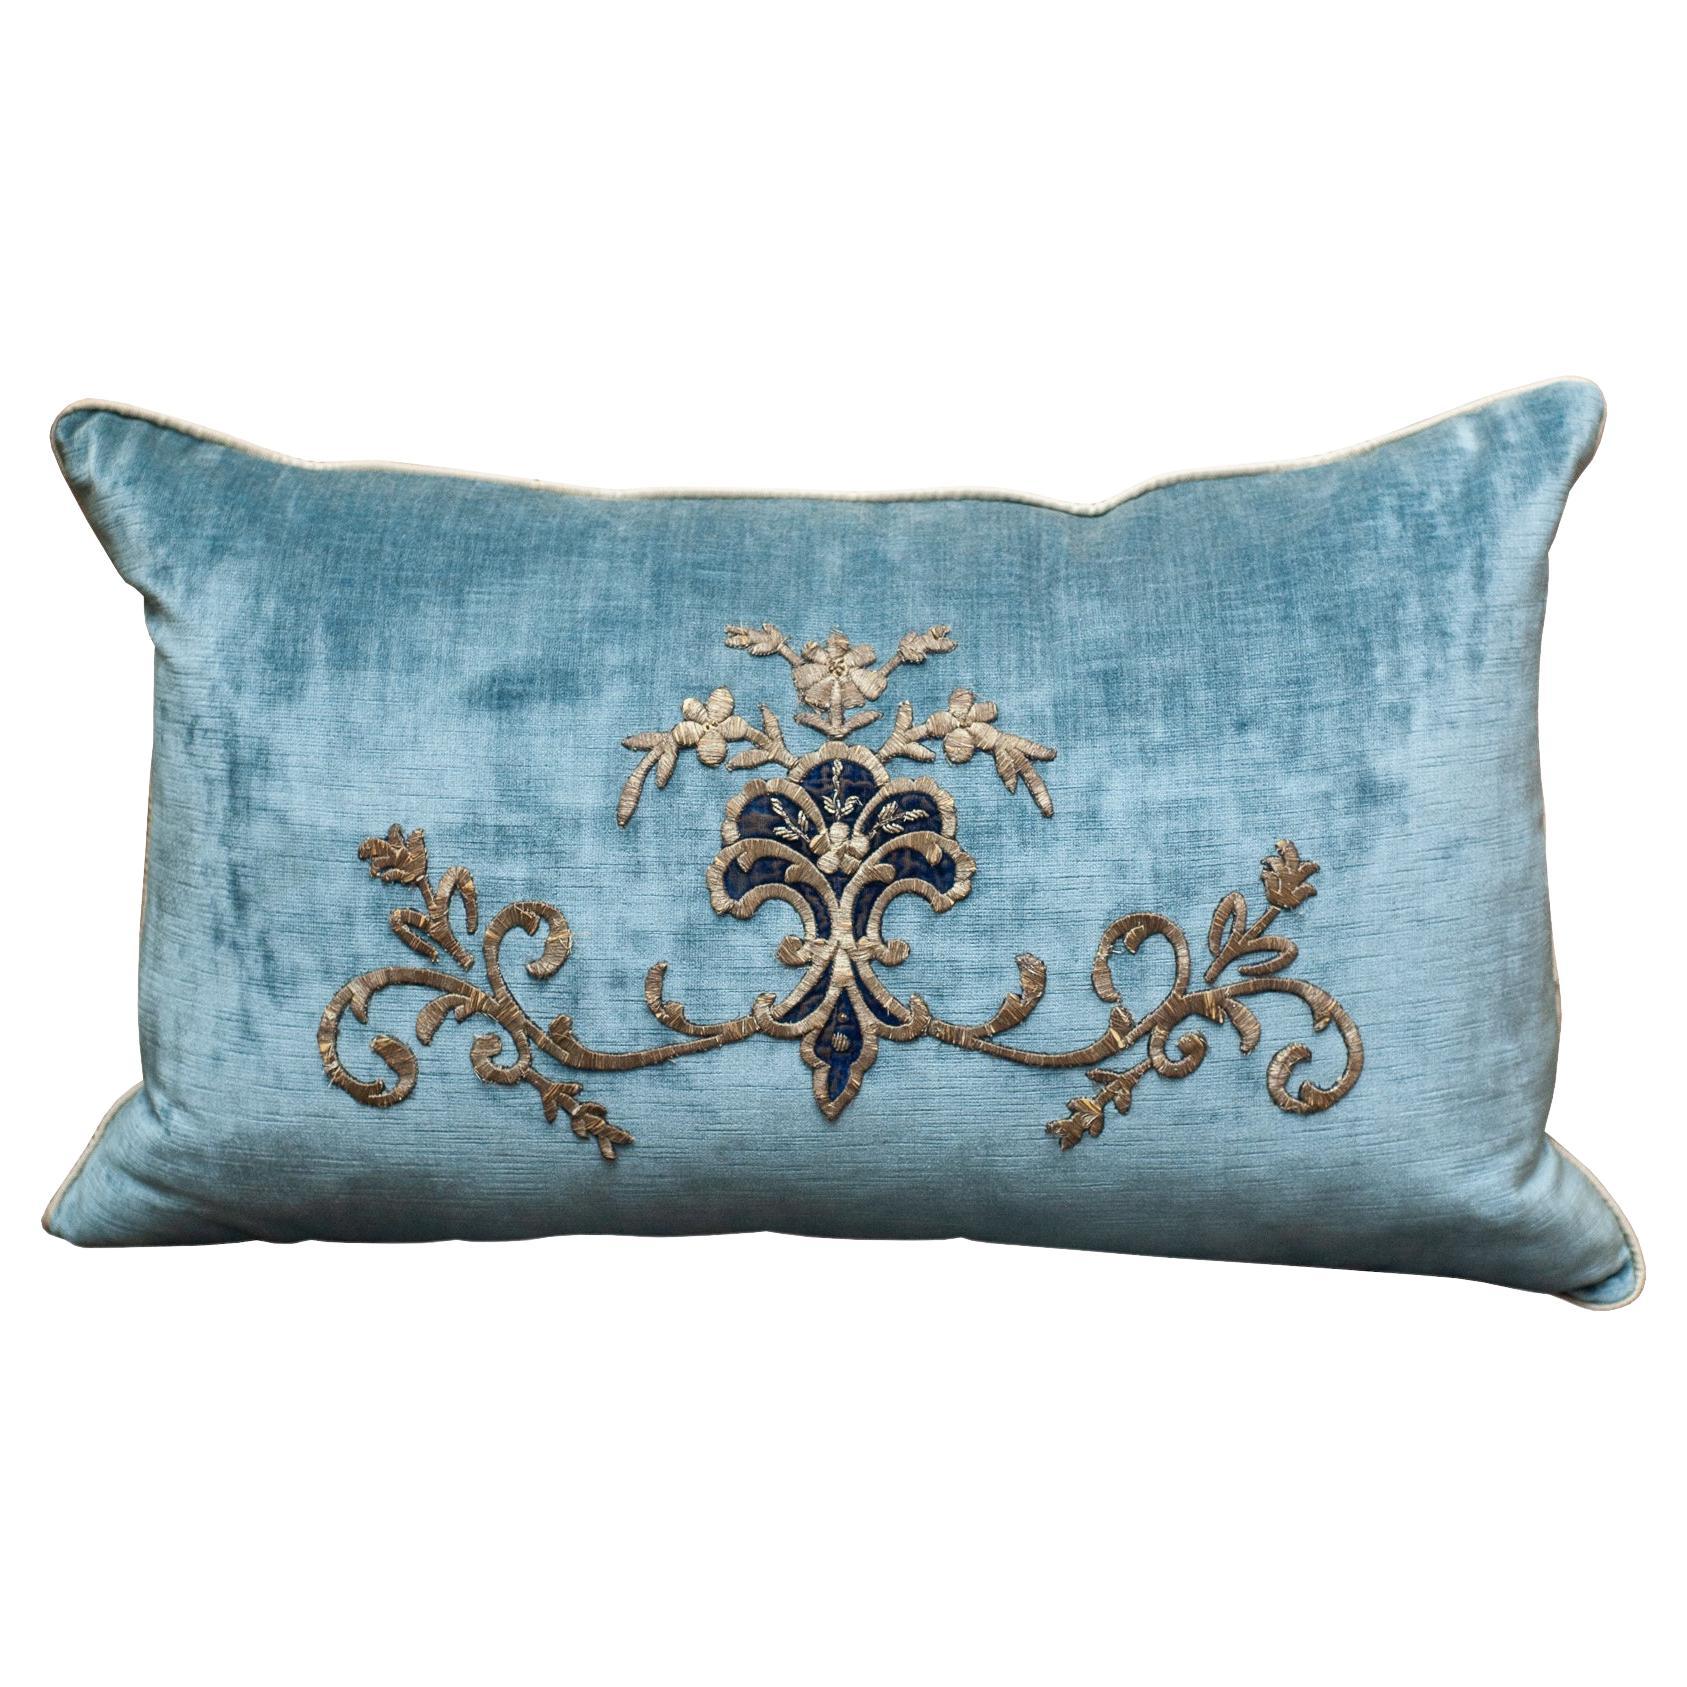 Contemporary Large Blue Velvet Pillow with Antique Embroidered Appliqué For Sale